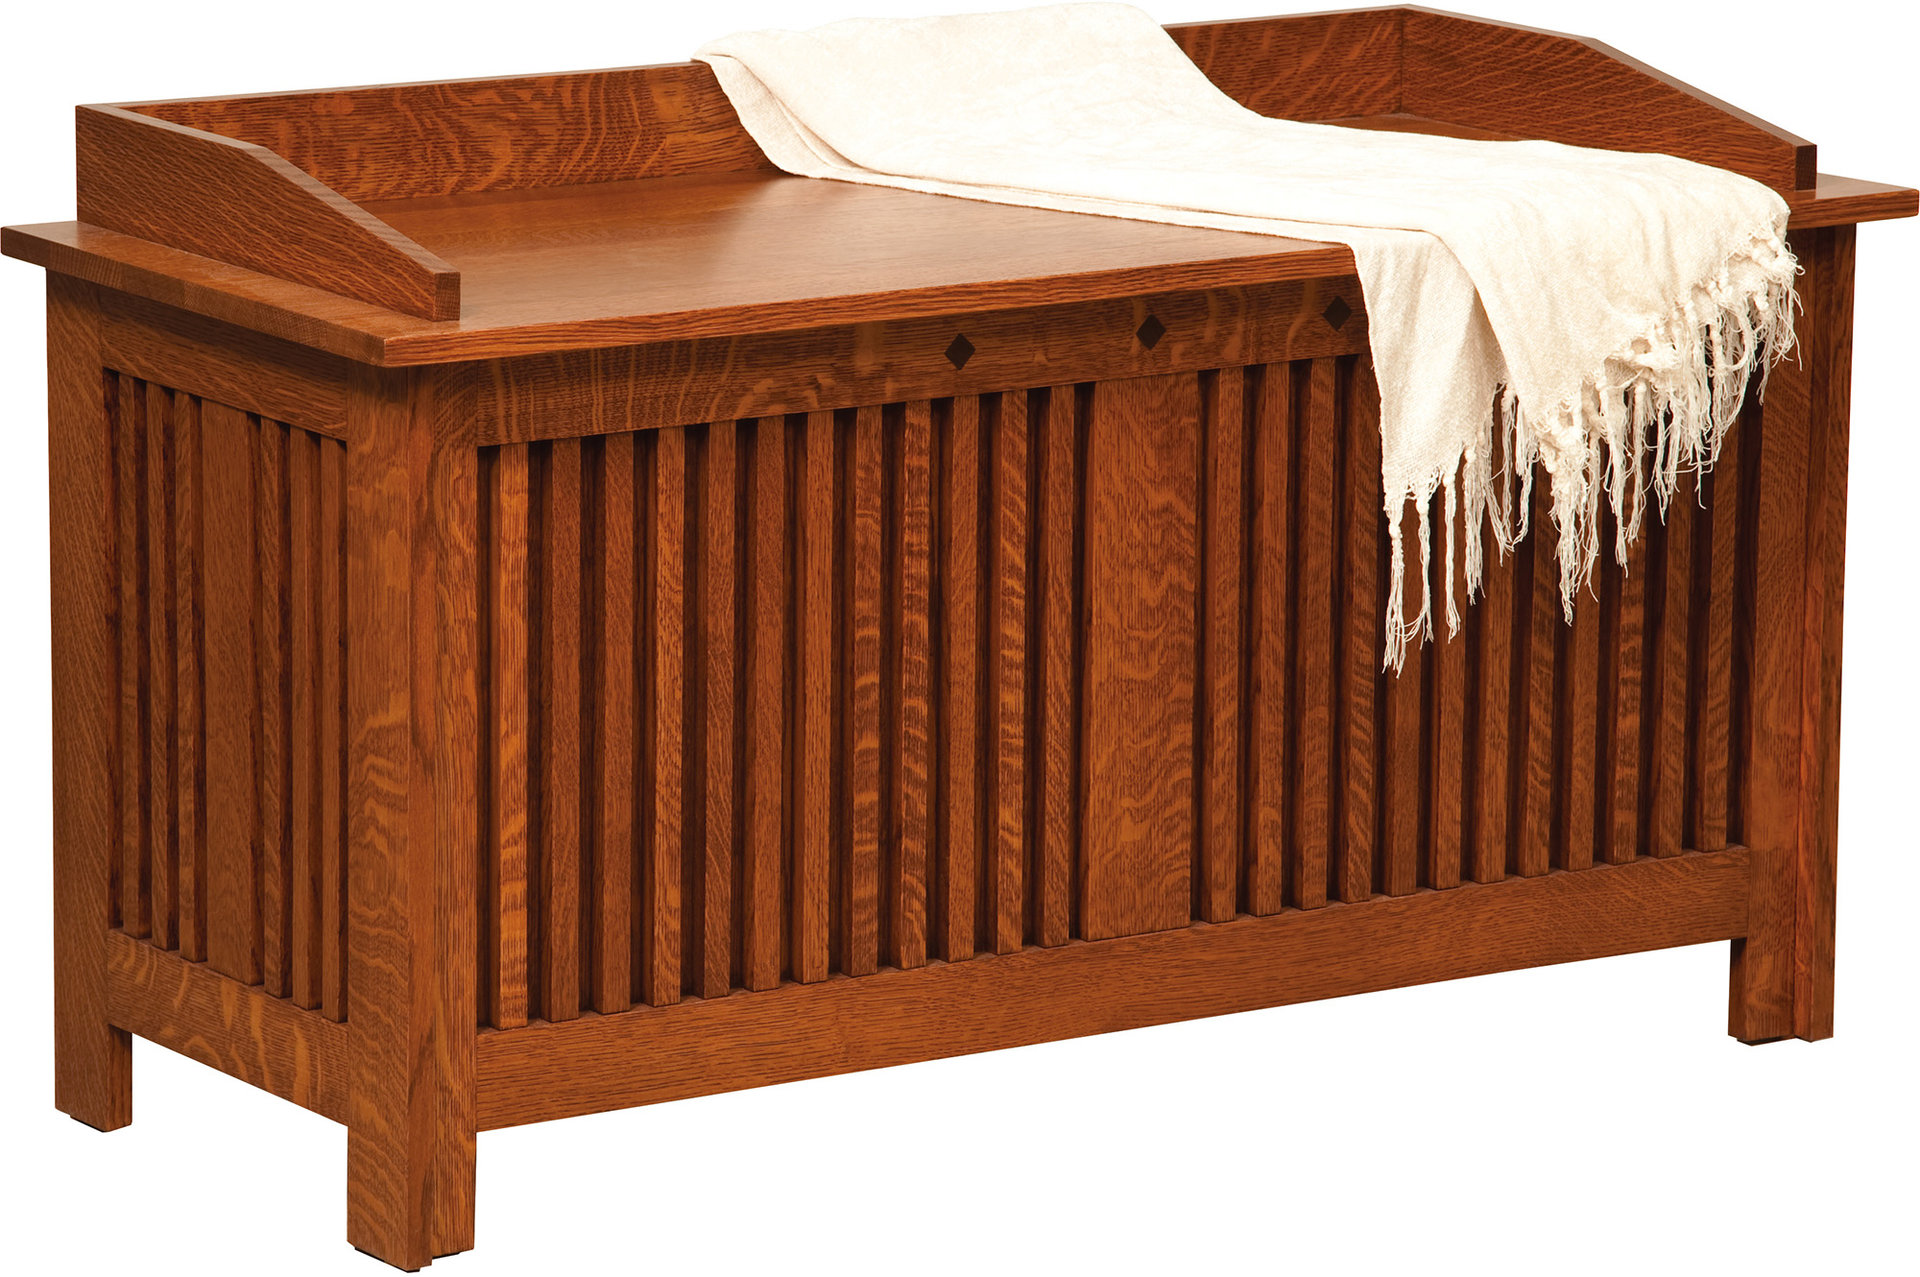 Amish Cedar Chests and Blanket Chests